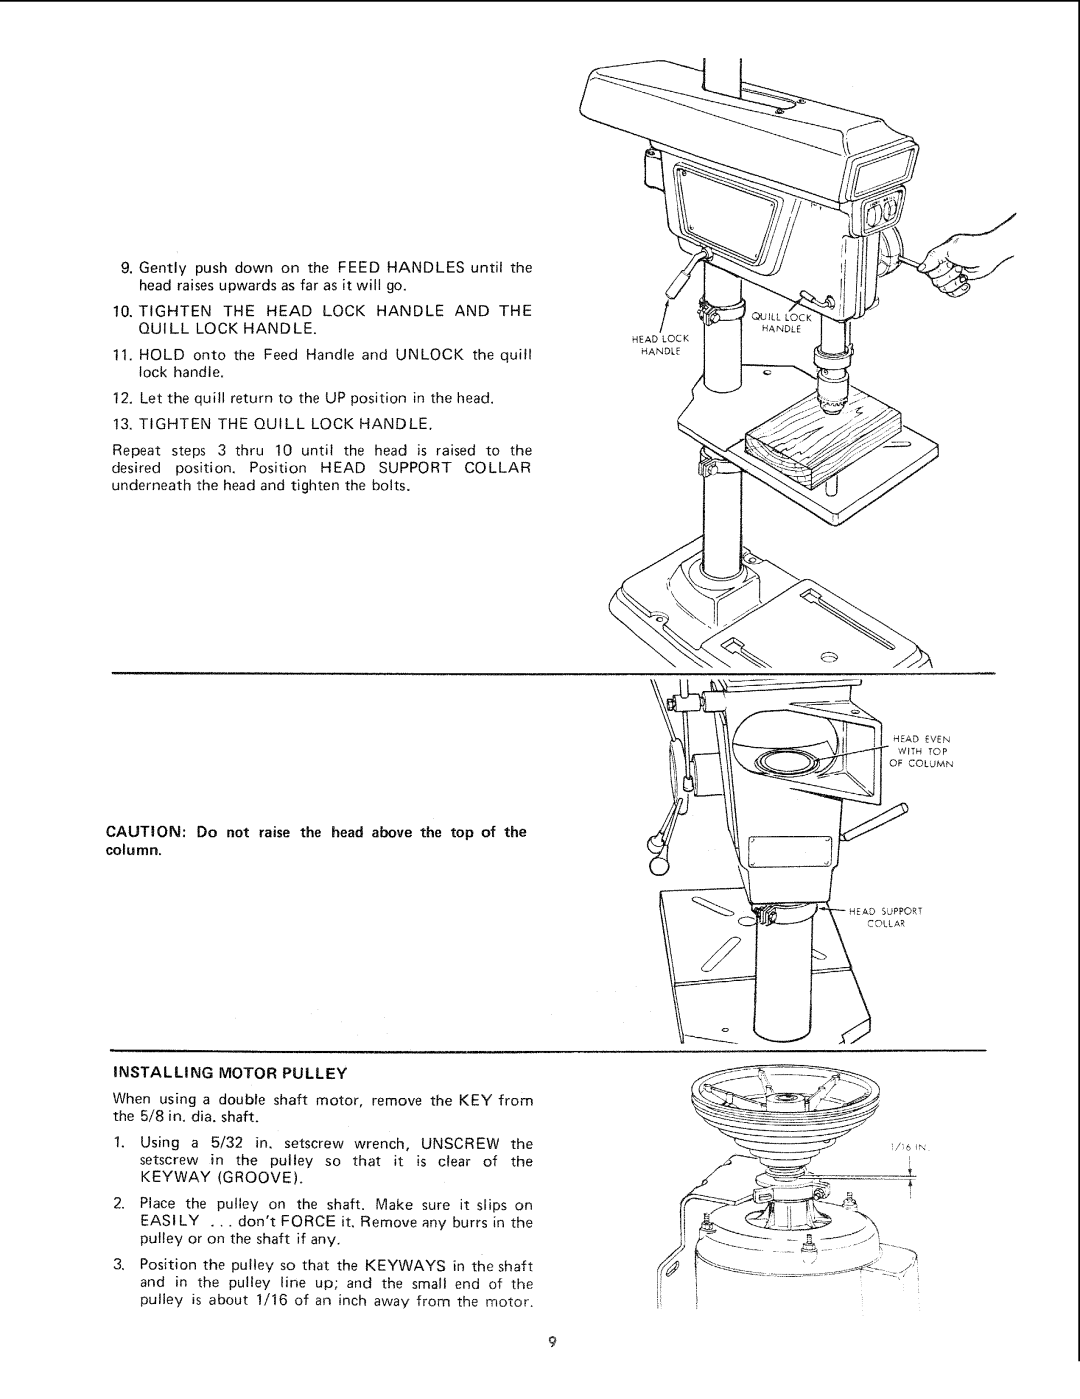 Sears 113.21371 manual Installing Motor Pulley, CAUTION Do not raise the head above the top of the column 